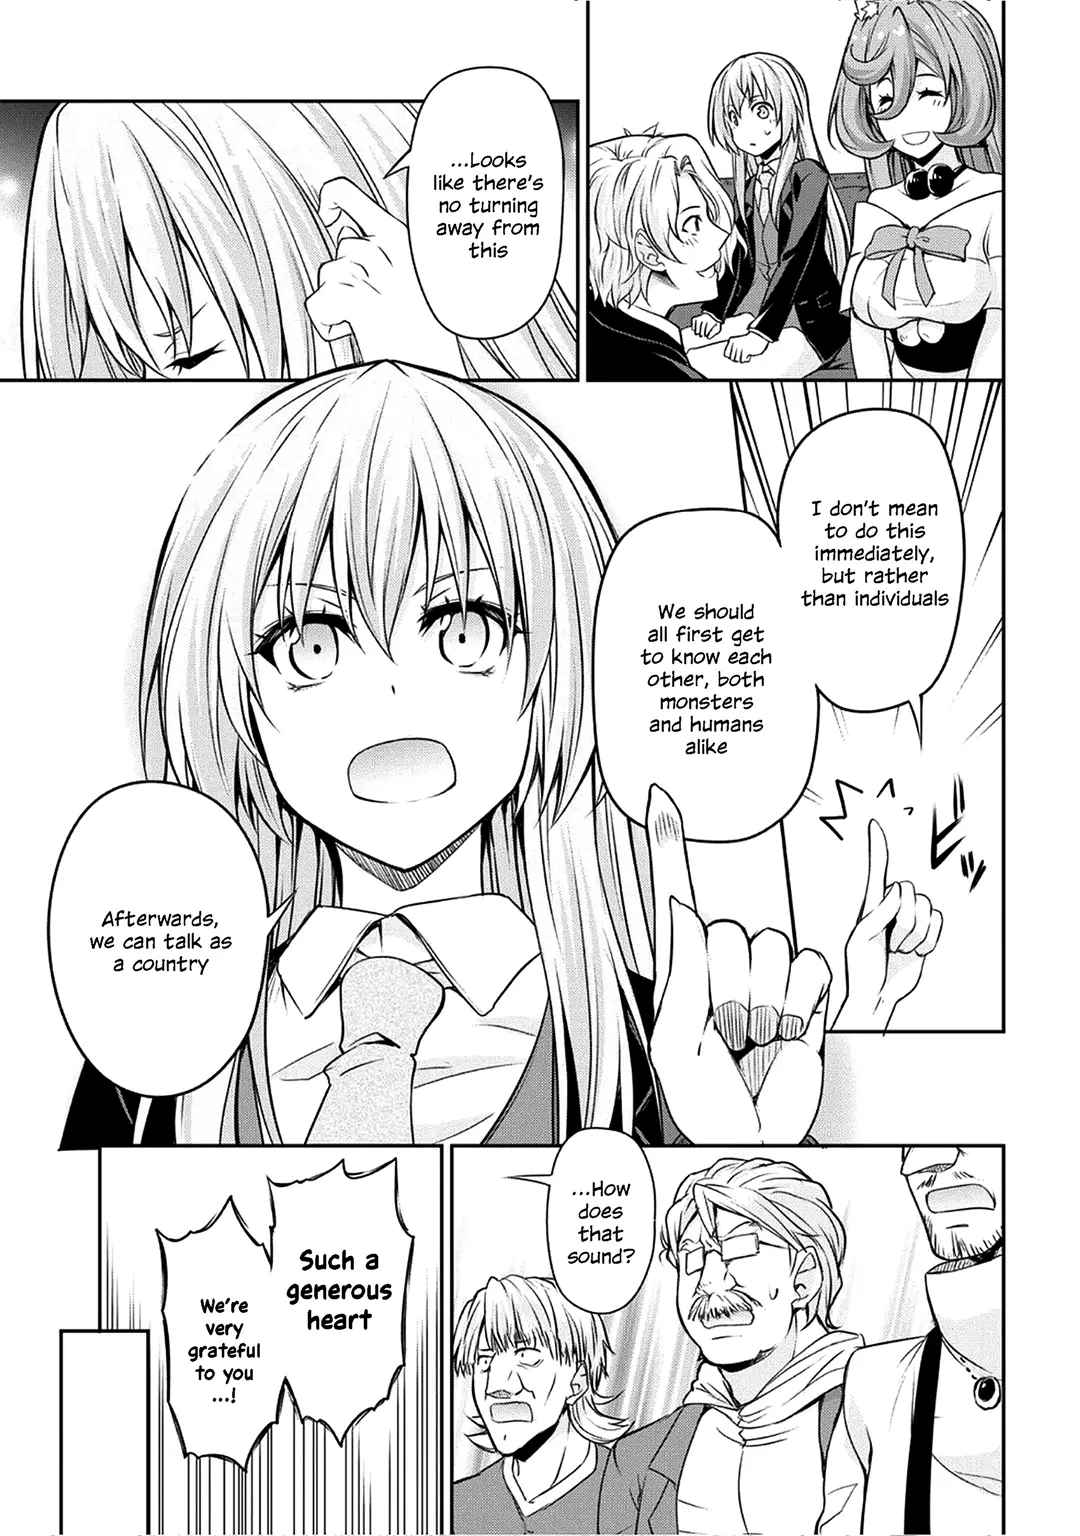 Tensei Shitara Slime Datta Ken: The Ways of Strolling in the Demon Country - 29 page 19